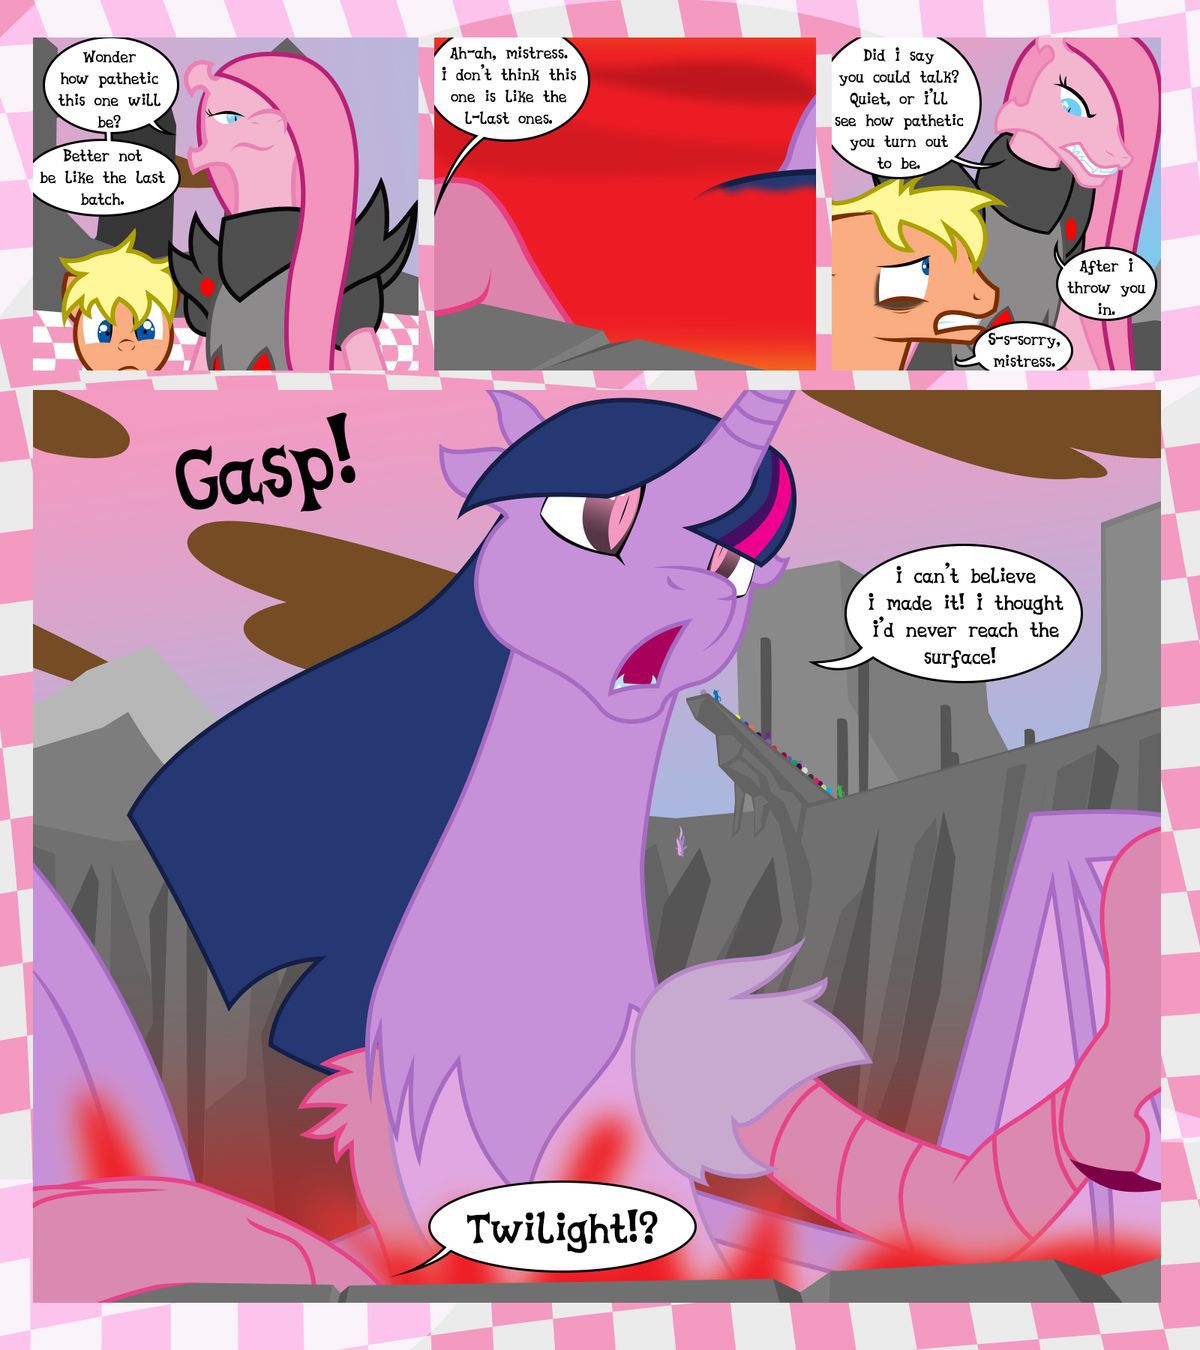 [GatesMcCloud] Cutie Mark Crusaders 10k: Chapter 3 - The Lost (My Little Pony: Friendship is Magic) [English] [Ongoing] 10